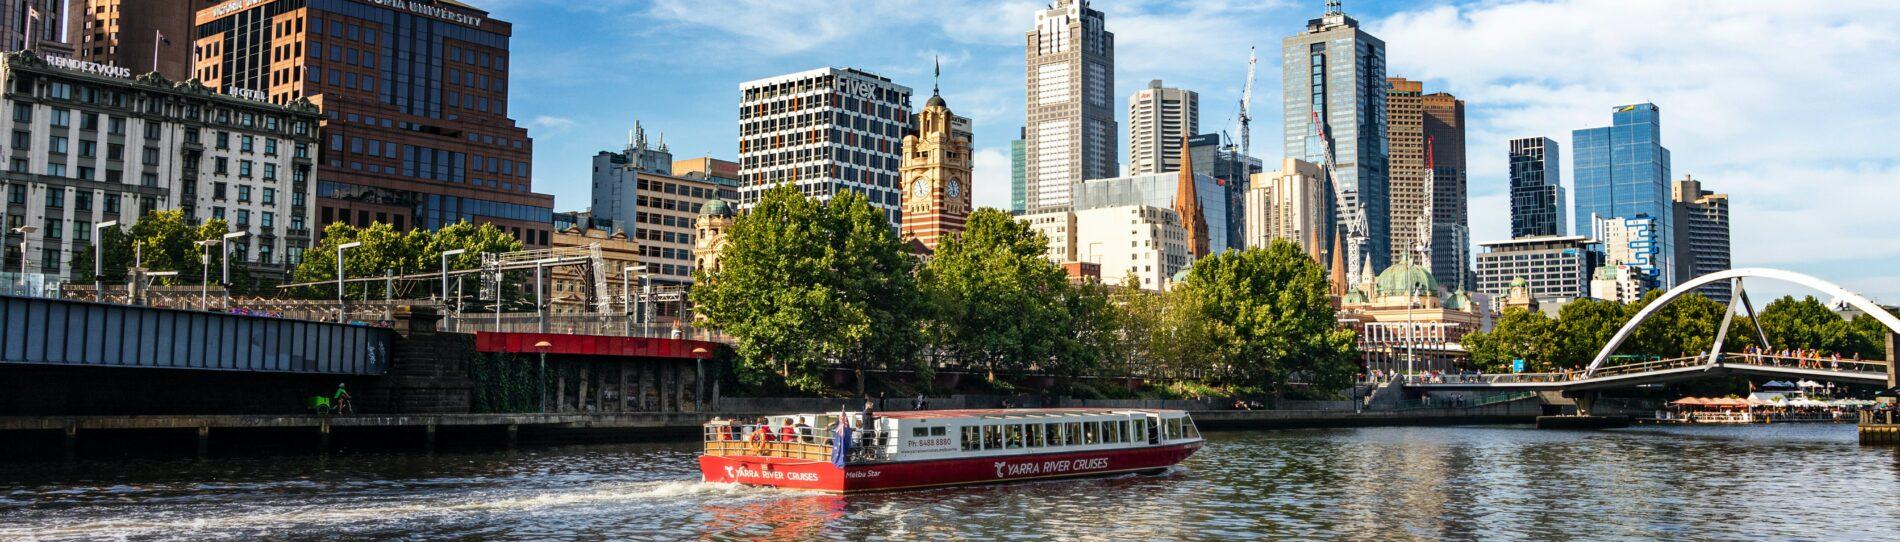 Melbourne stag cruise